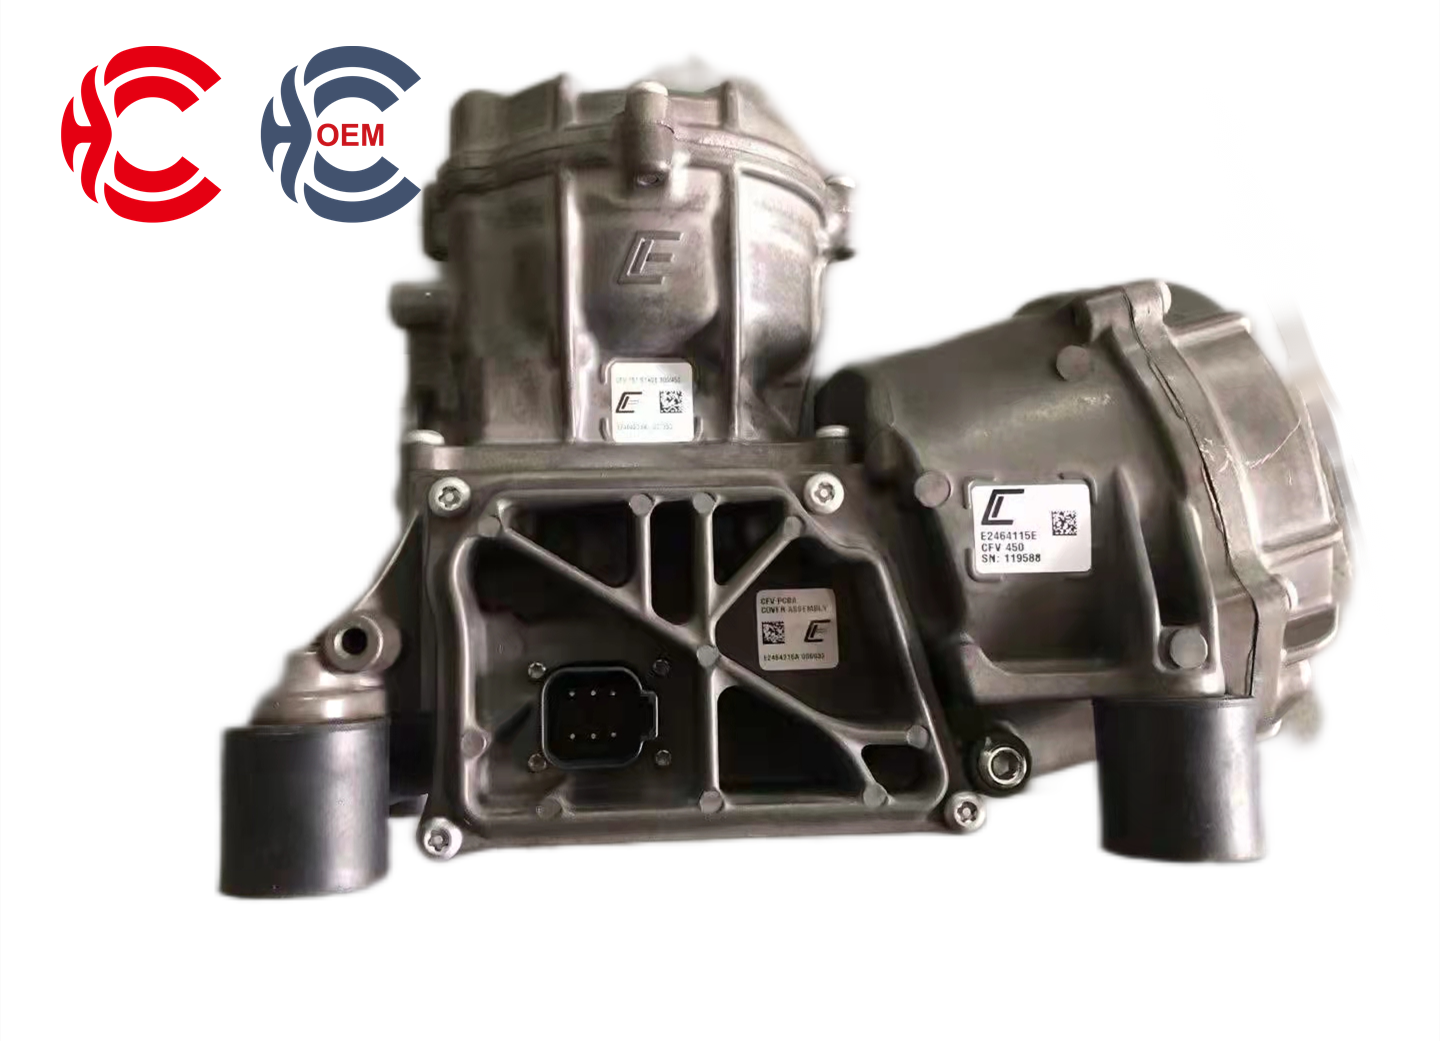 OEM: 202V13120-003Material: ABS MetalColor: black silverOrigin: Made in ChinaWeight: 4000gPacking List: 1* CFV Valve More ServiceWe can provide OEM Manufacturing serviceWe can Be your one-step solution for Auto PartsWe can provide technical scheme for you Feel Free to Contact Us, We will get back to you as soon as possible.